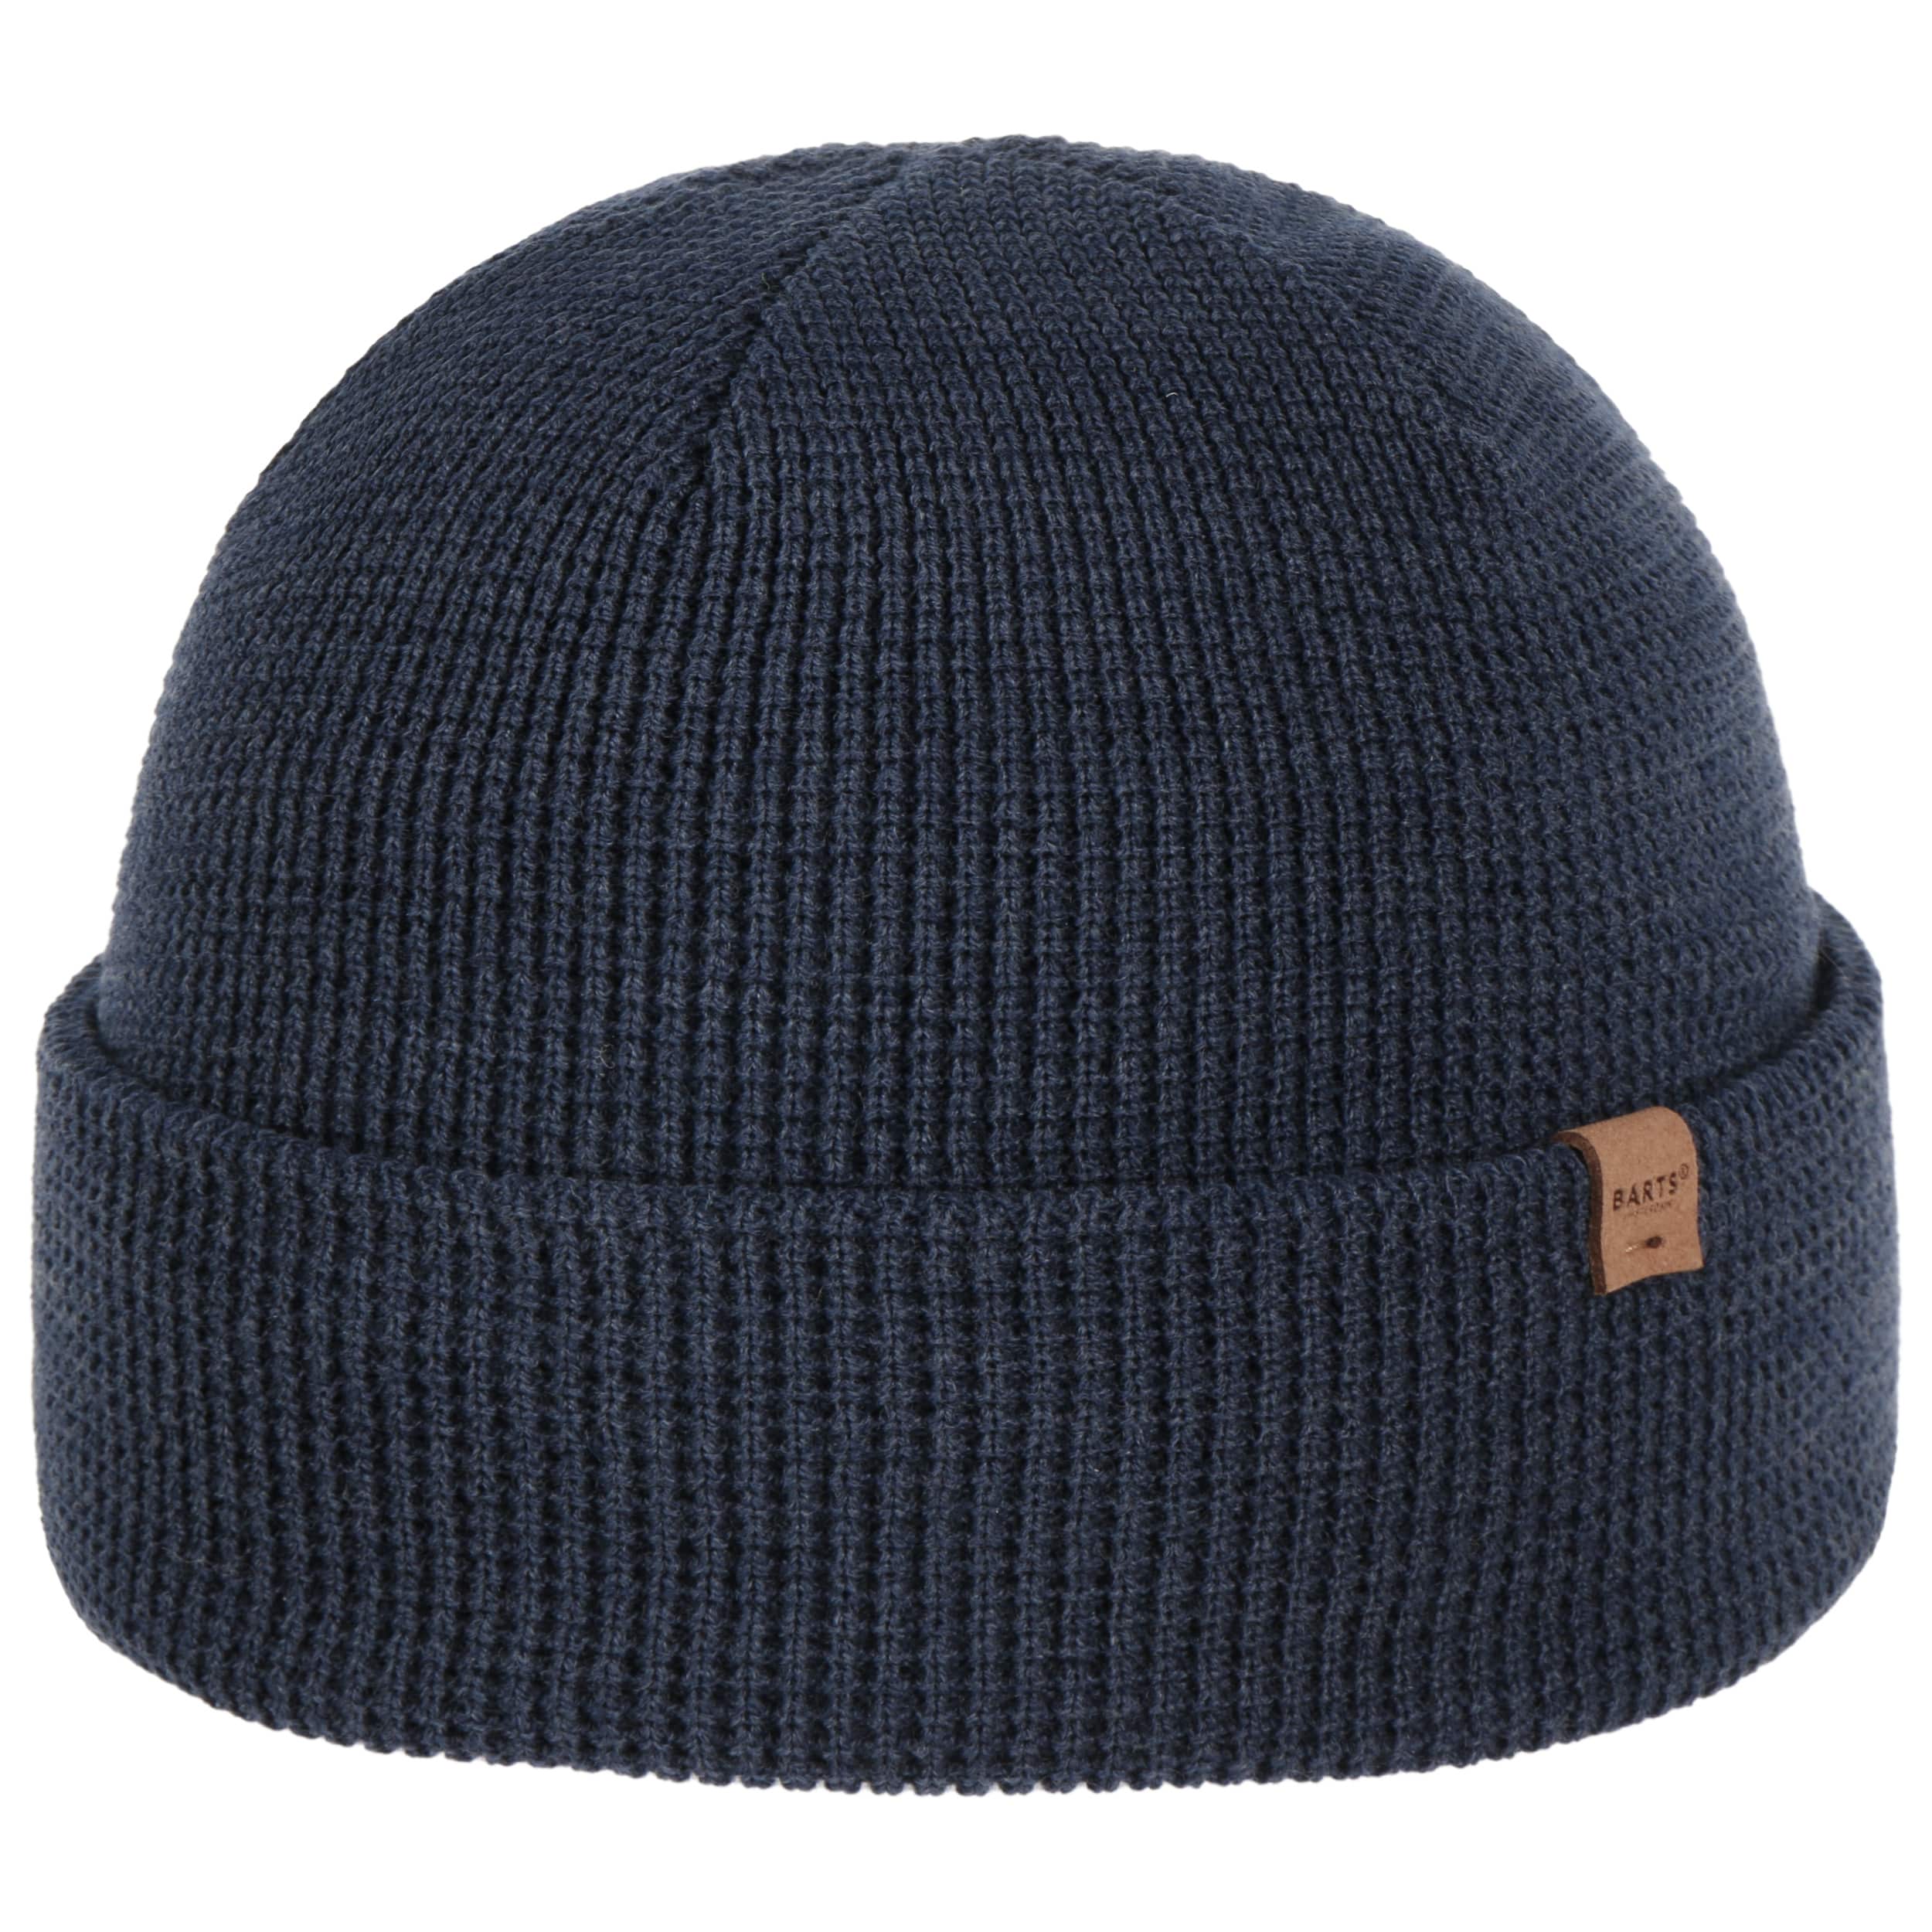 Coler Beanie Hat by Barts - 26,95 €